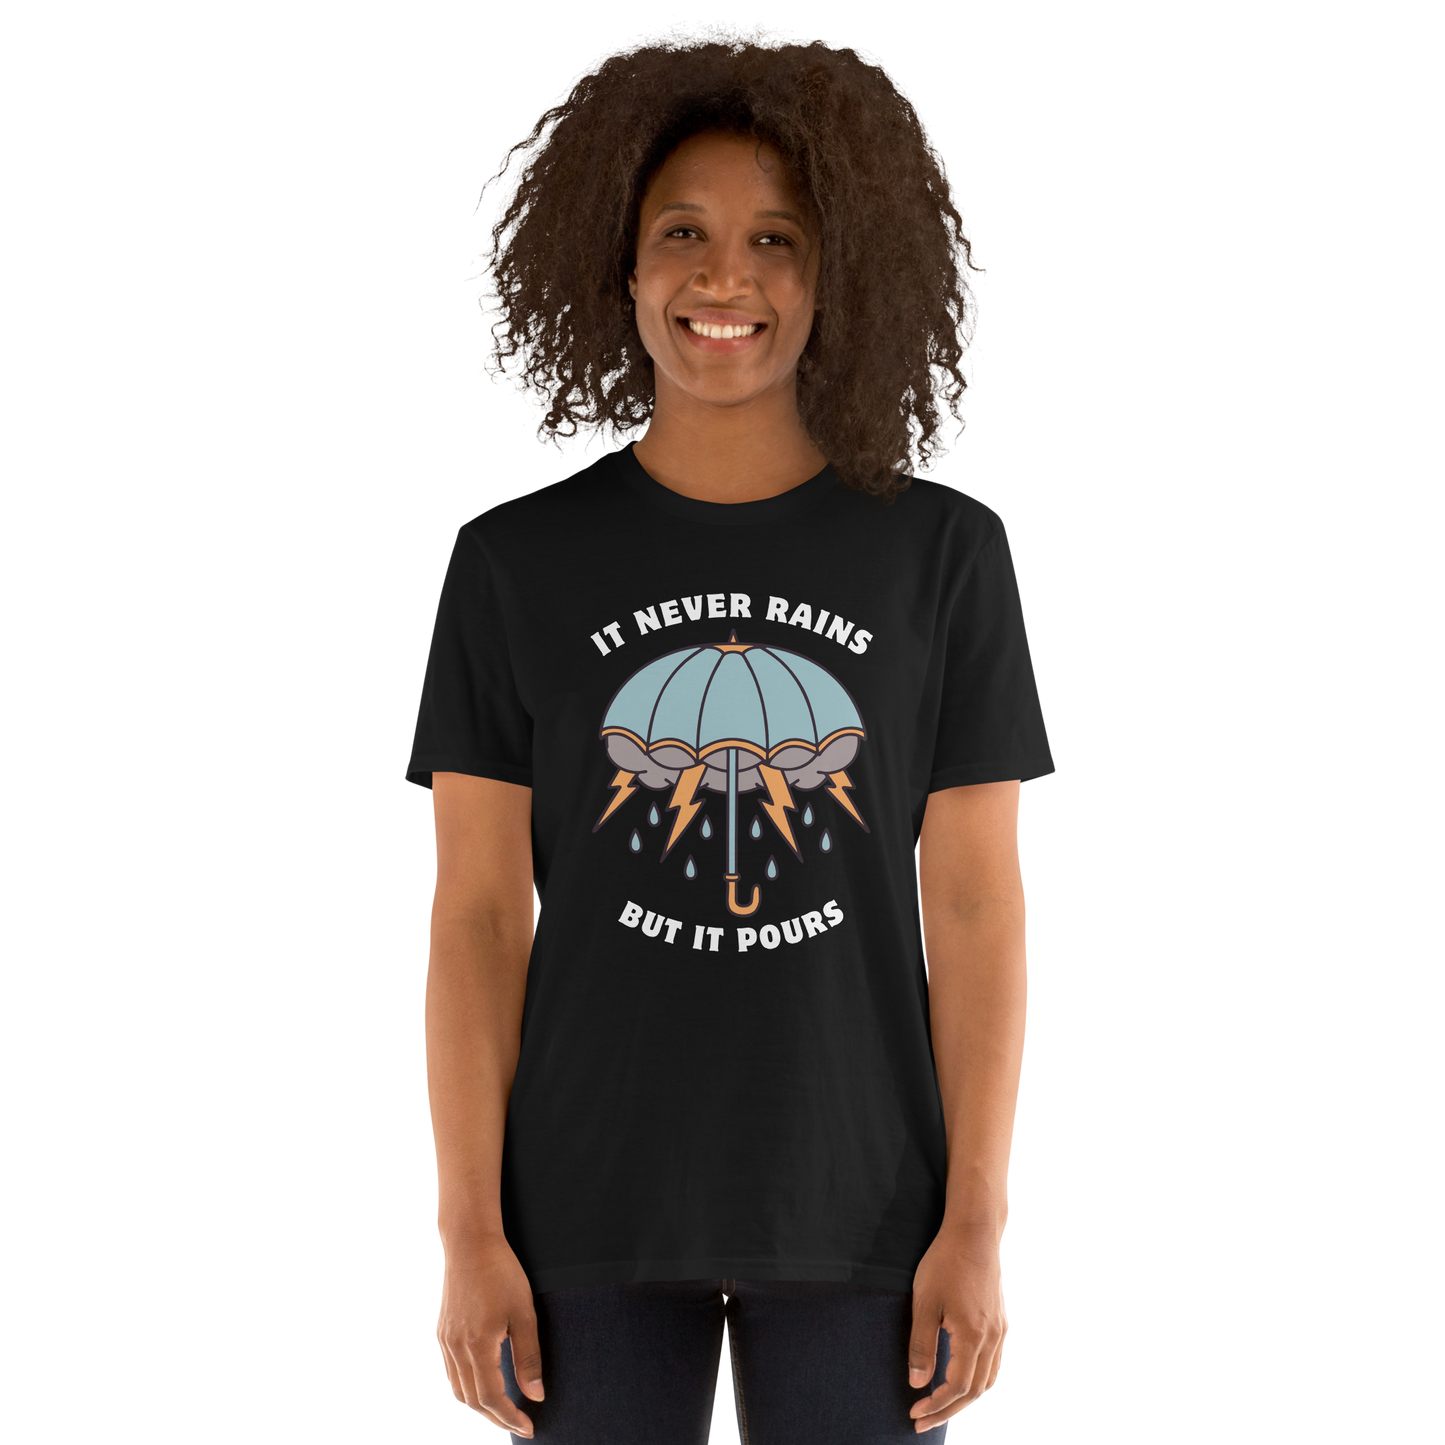 Smiling woman wearing a Black Umbrella T-Shirt featuring a unique It Never Rains But It Pours graphic on the chest - Cool Tattoo-Inspired Graphic Umbrella T-Shirts - Boozy Fox